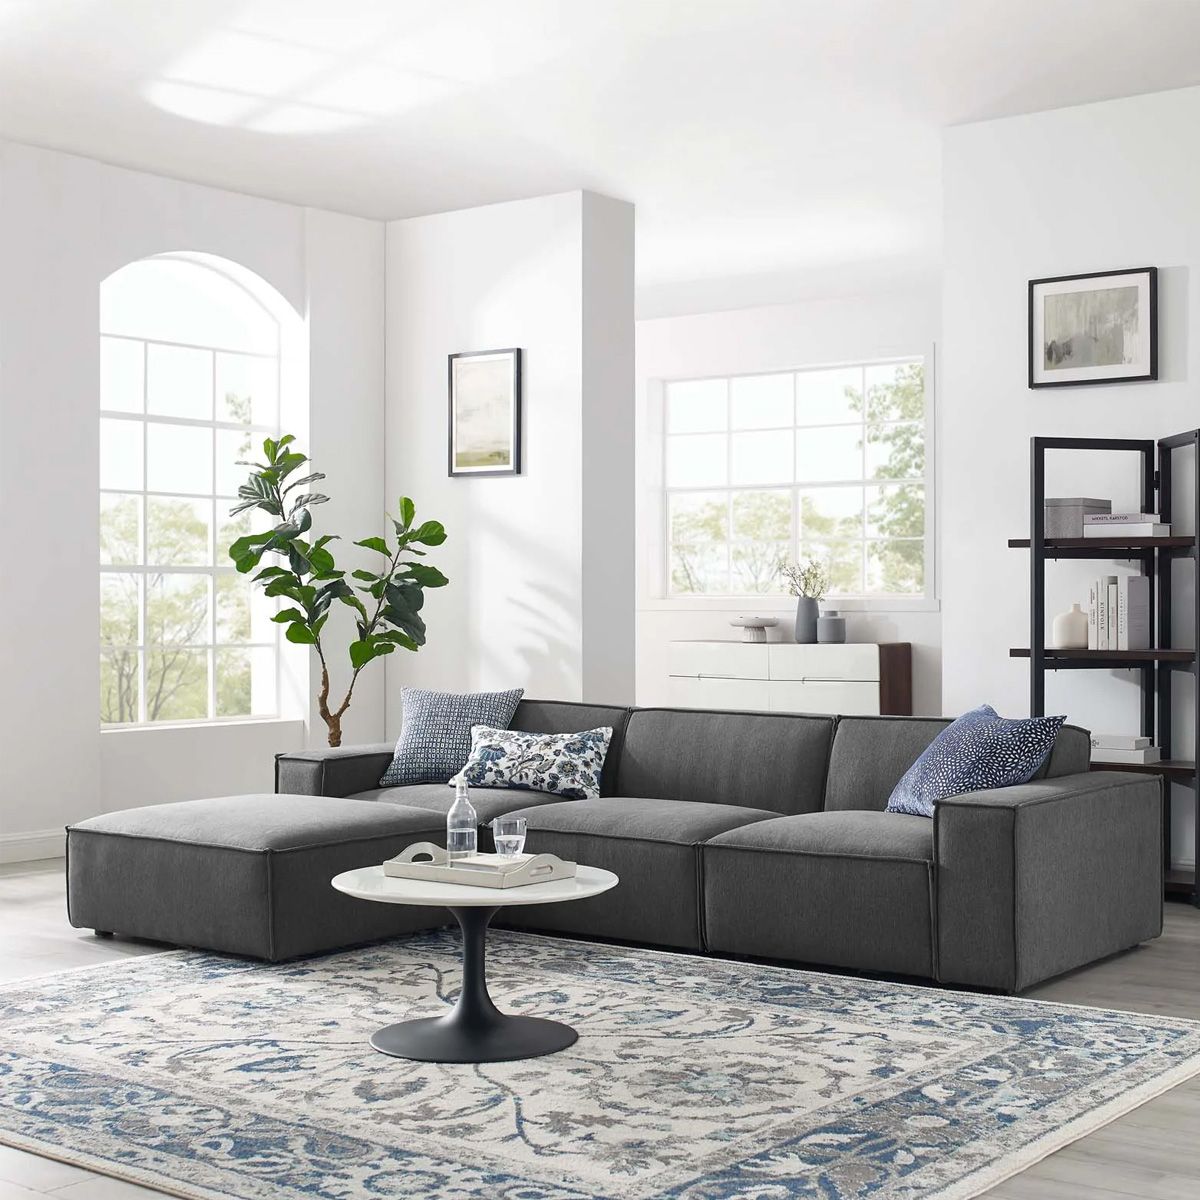 Vitality Sectional Sofa 4 Pieces In Dark Grey From Aed 1949 | Atoz Furniture Inside Dark Gray Sectional Sofas (Photo 9 of 15)